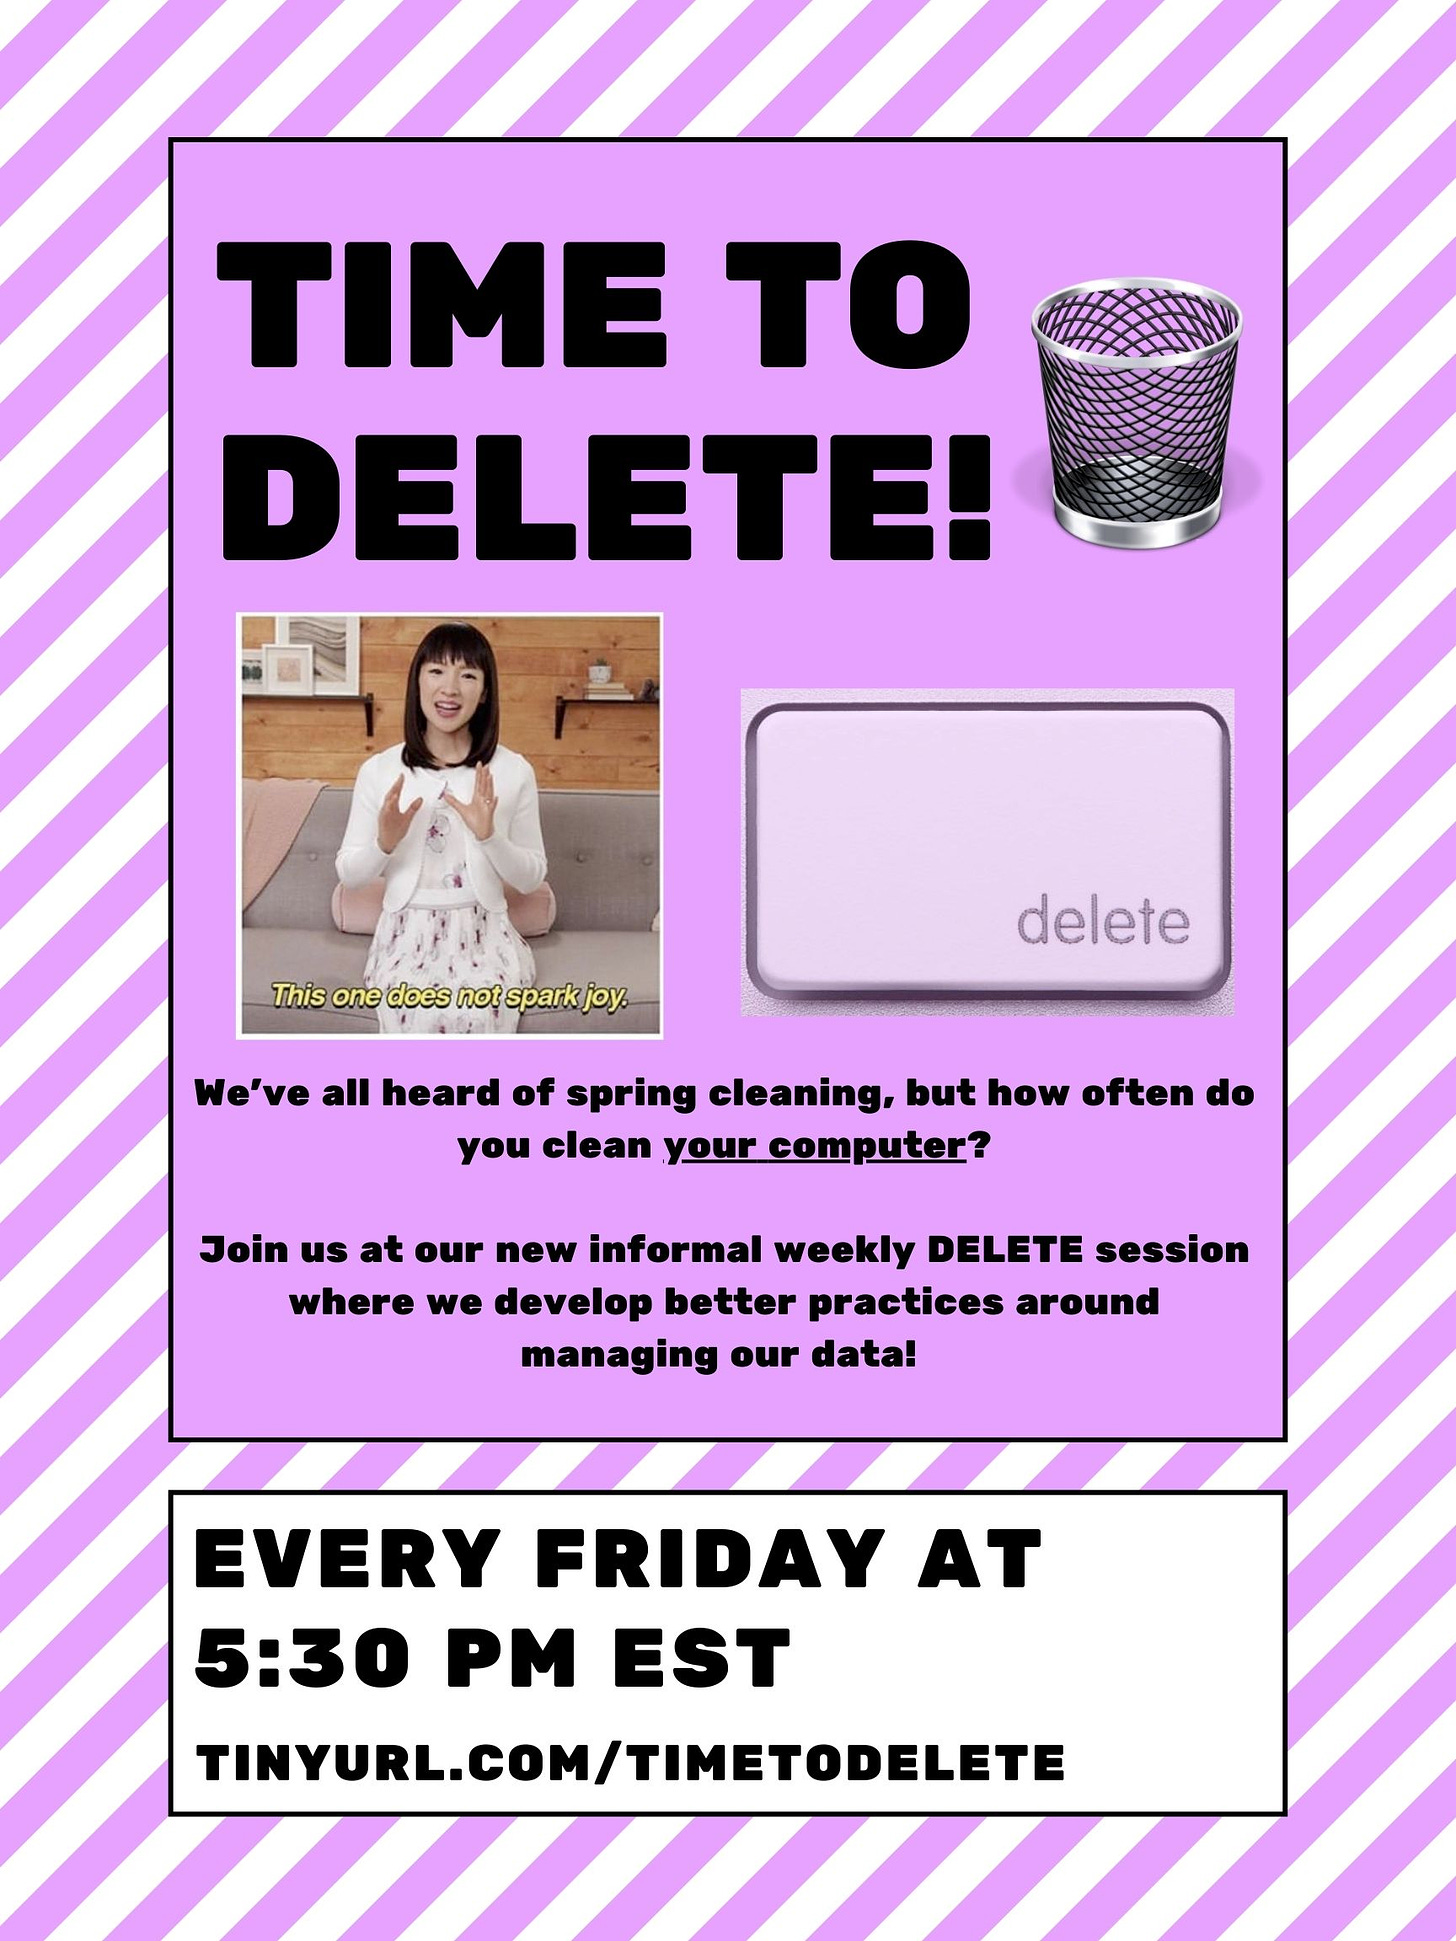 time to delete poster with a meme of marie kondo saying "this one does not spark joy" and also a picture of the delete button on mac.